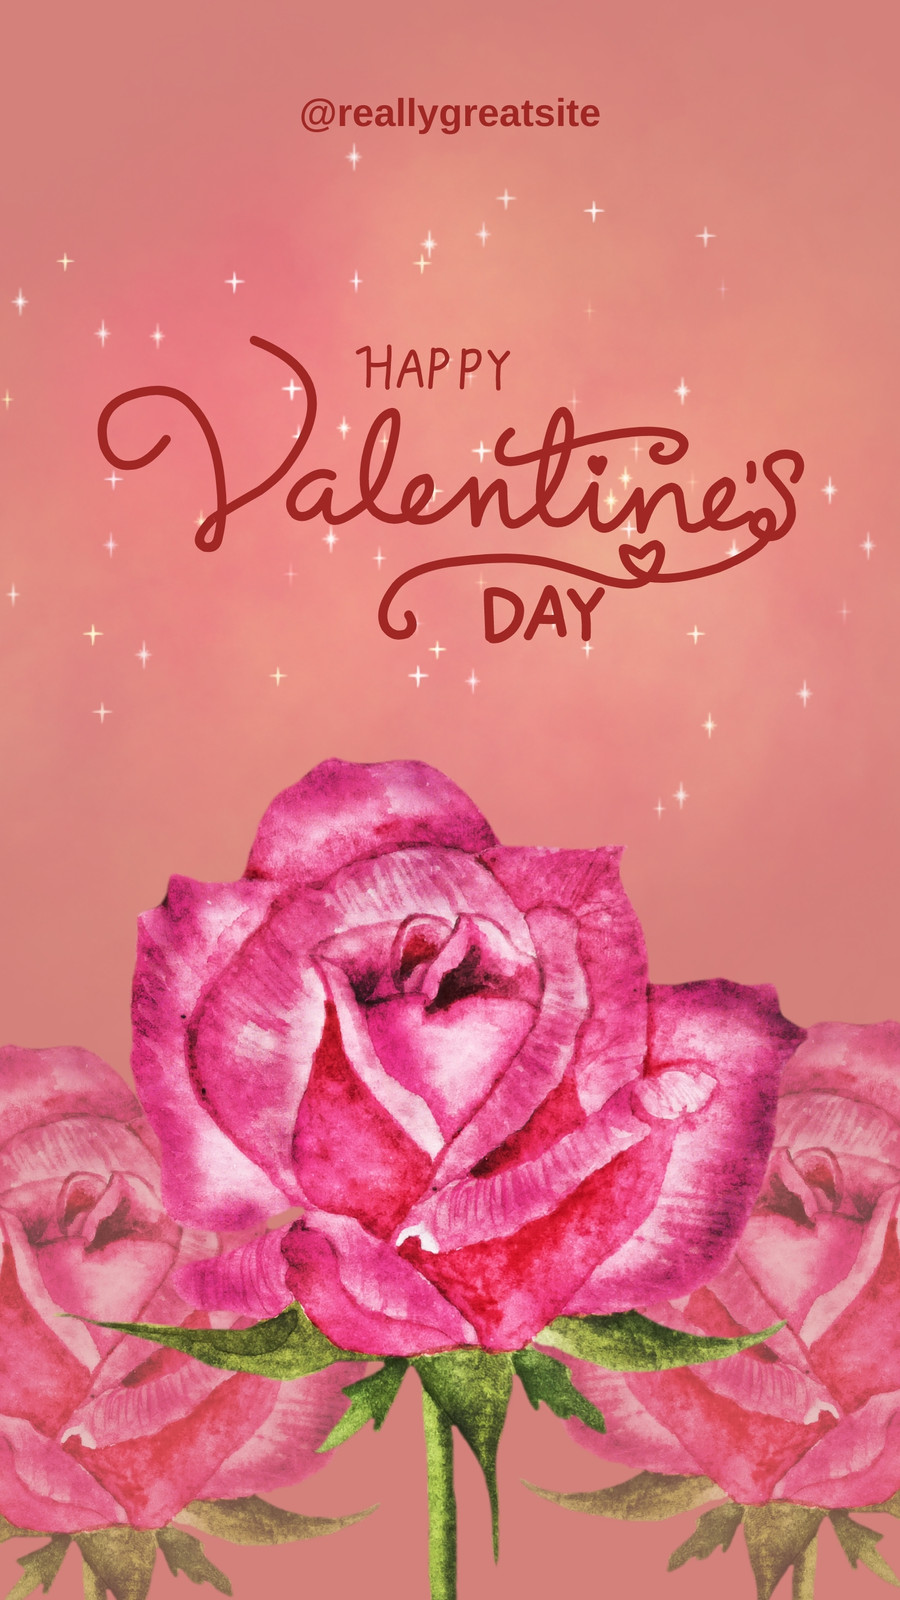 Page 19 - Free Valentine's Day Instagram Story templates